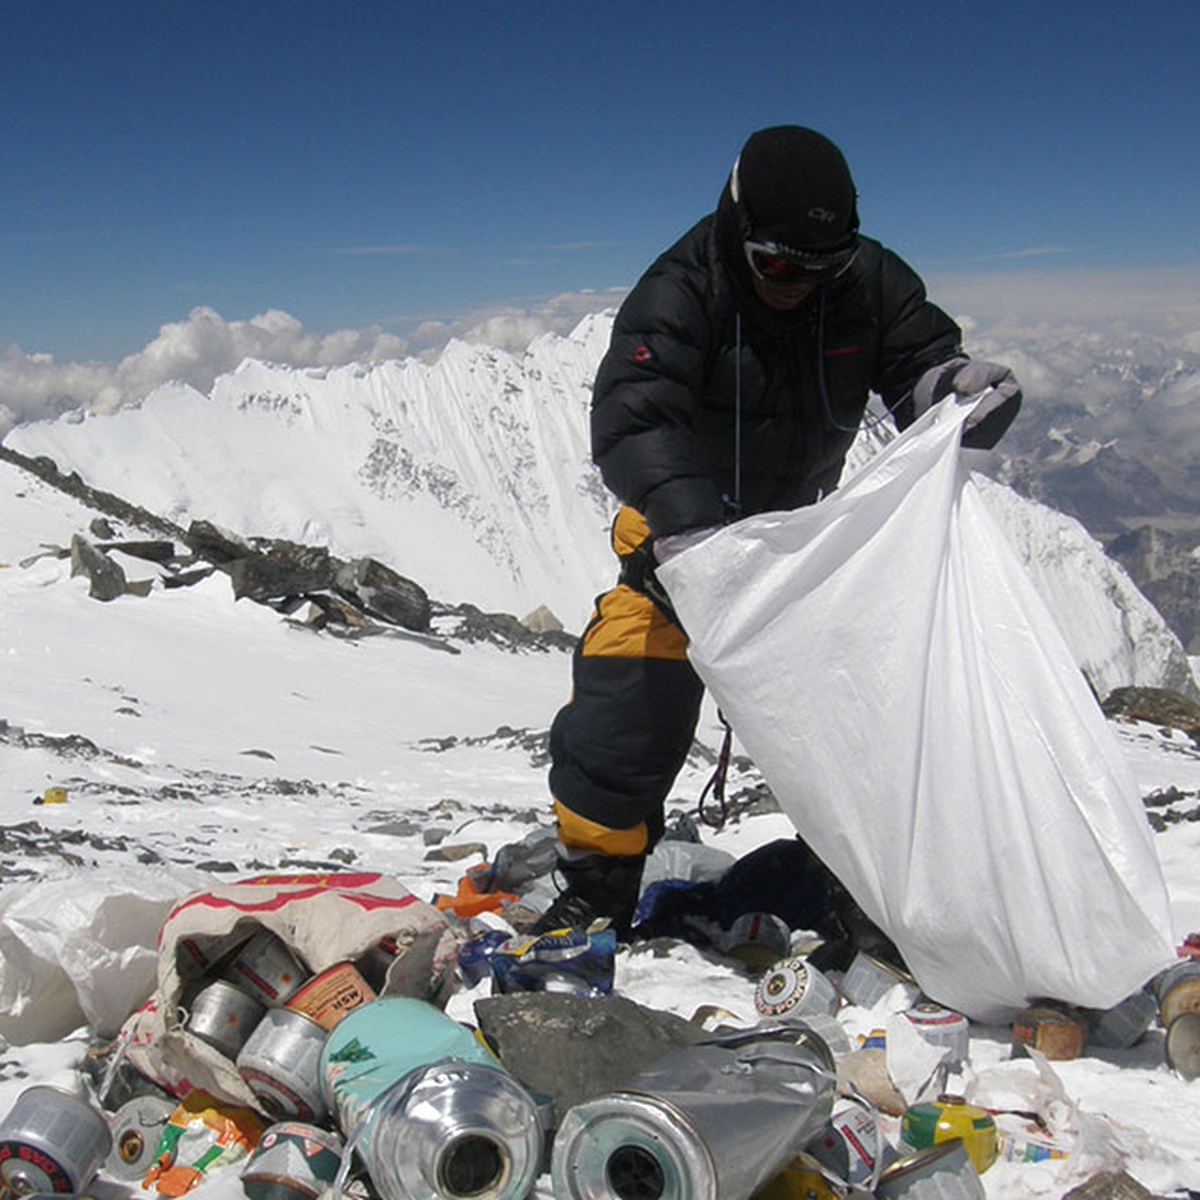 Mount Everest Is The World S Highest Garbage Dump Why Sustainable Tourism In Nepal Is Badly Needed Lifegate - nature spot of nepal the himalayas let it be roblox